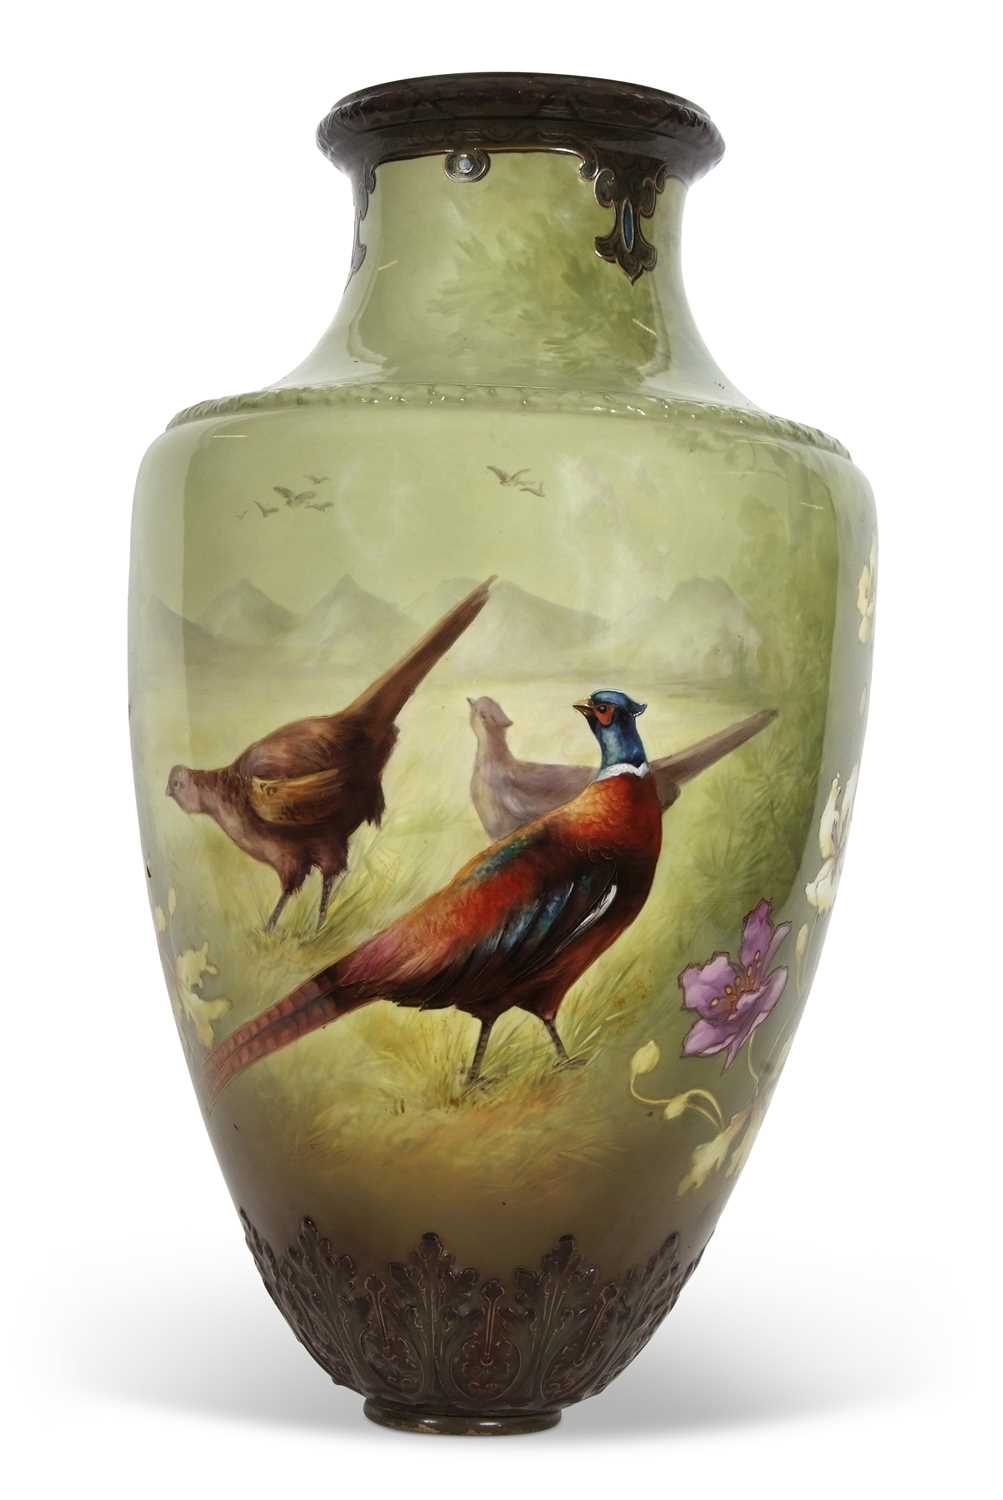 A very large Art Nouveau style vase, the green ground painted with pheasants and flowers, probably